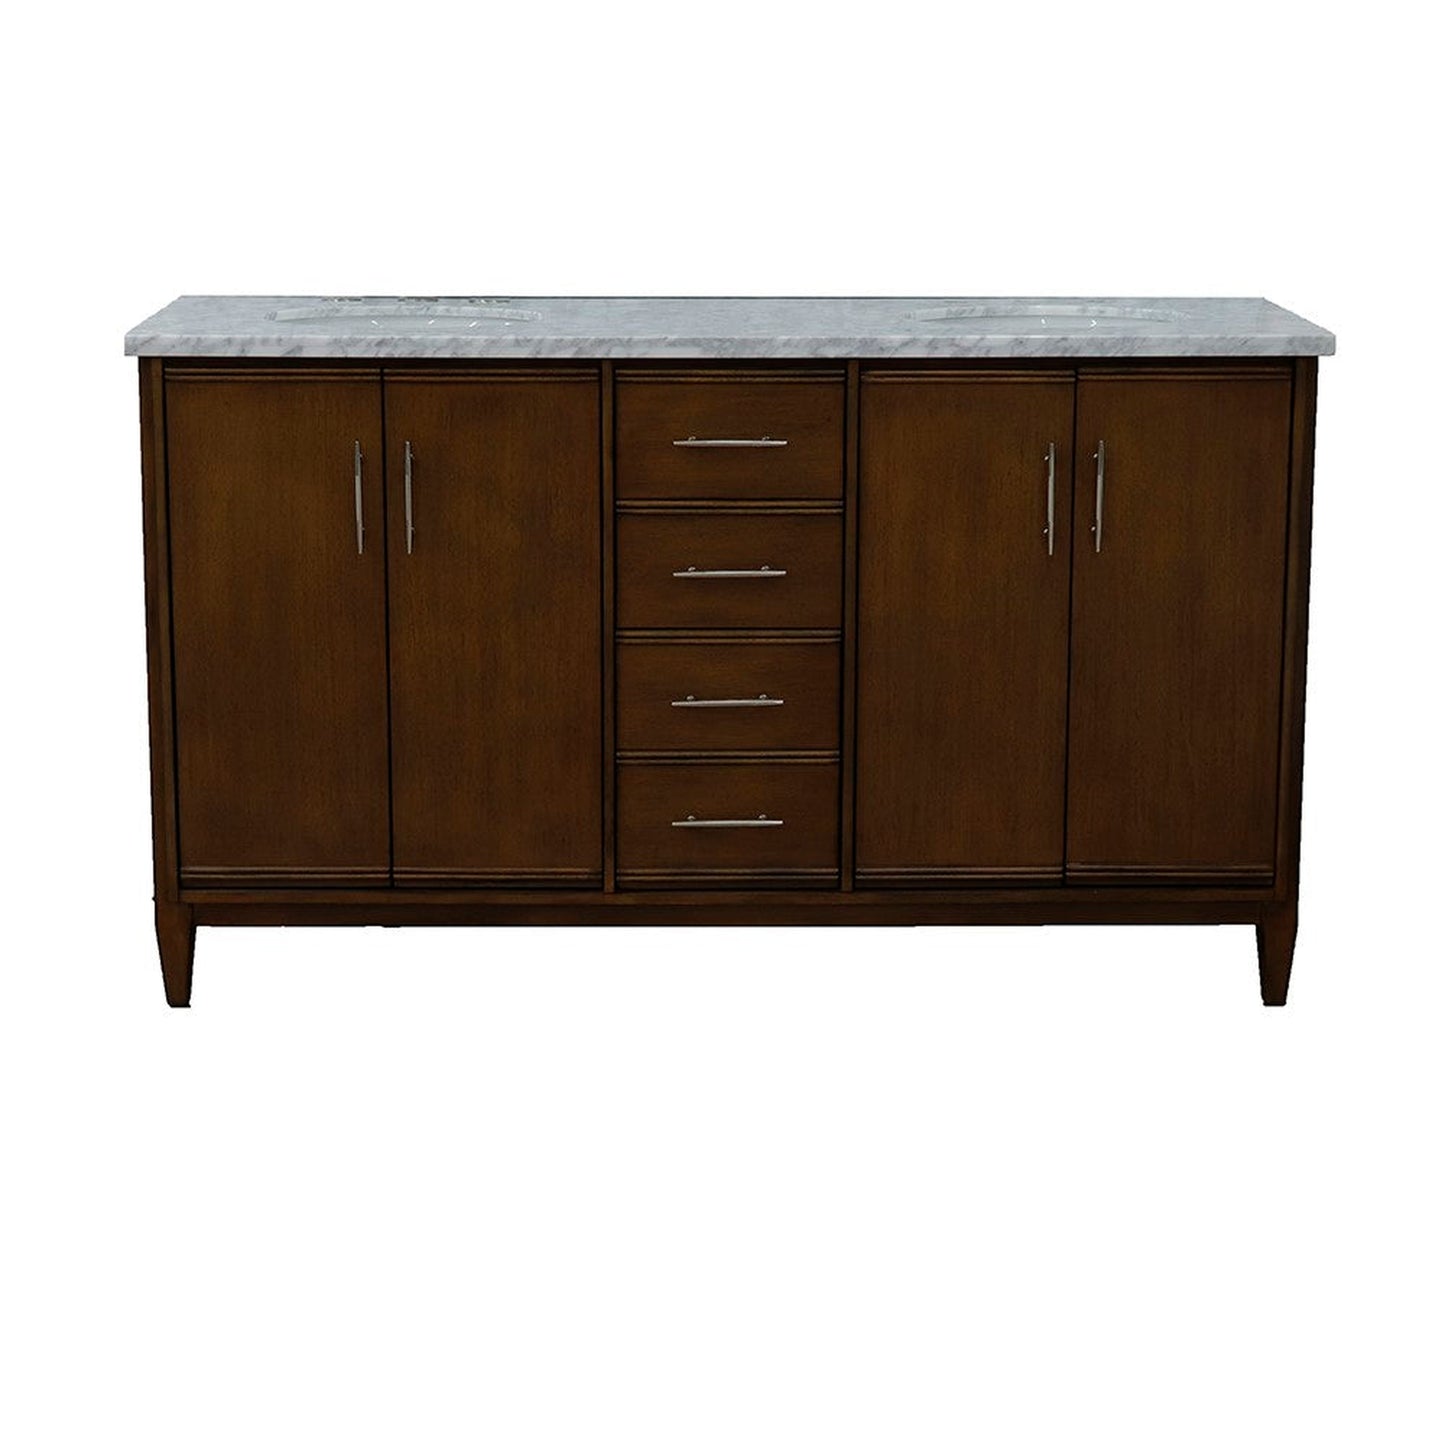 Bellaterra Home MCM 61" 4-Door 3-Drawer Walnut Freestanding Vanity Set With Ceramic Double Undermount Oval Sink and White Carrara Marble Top